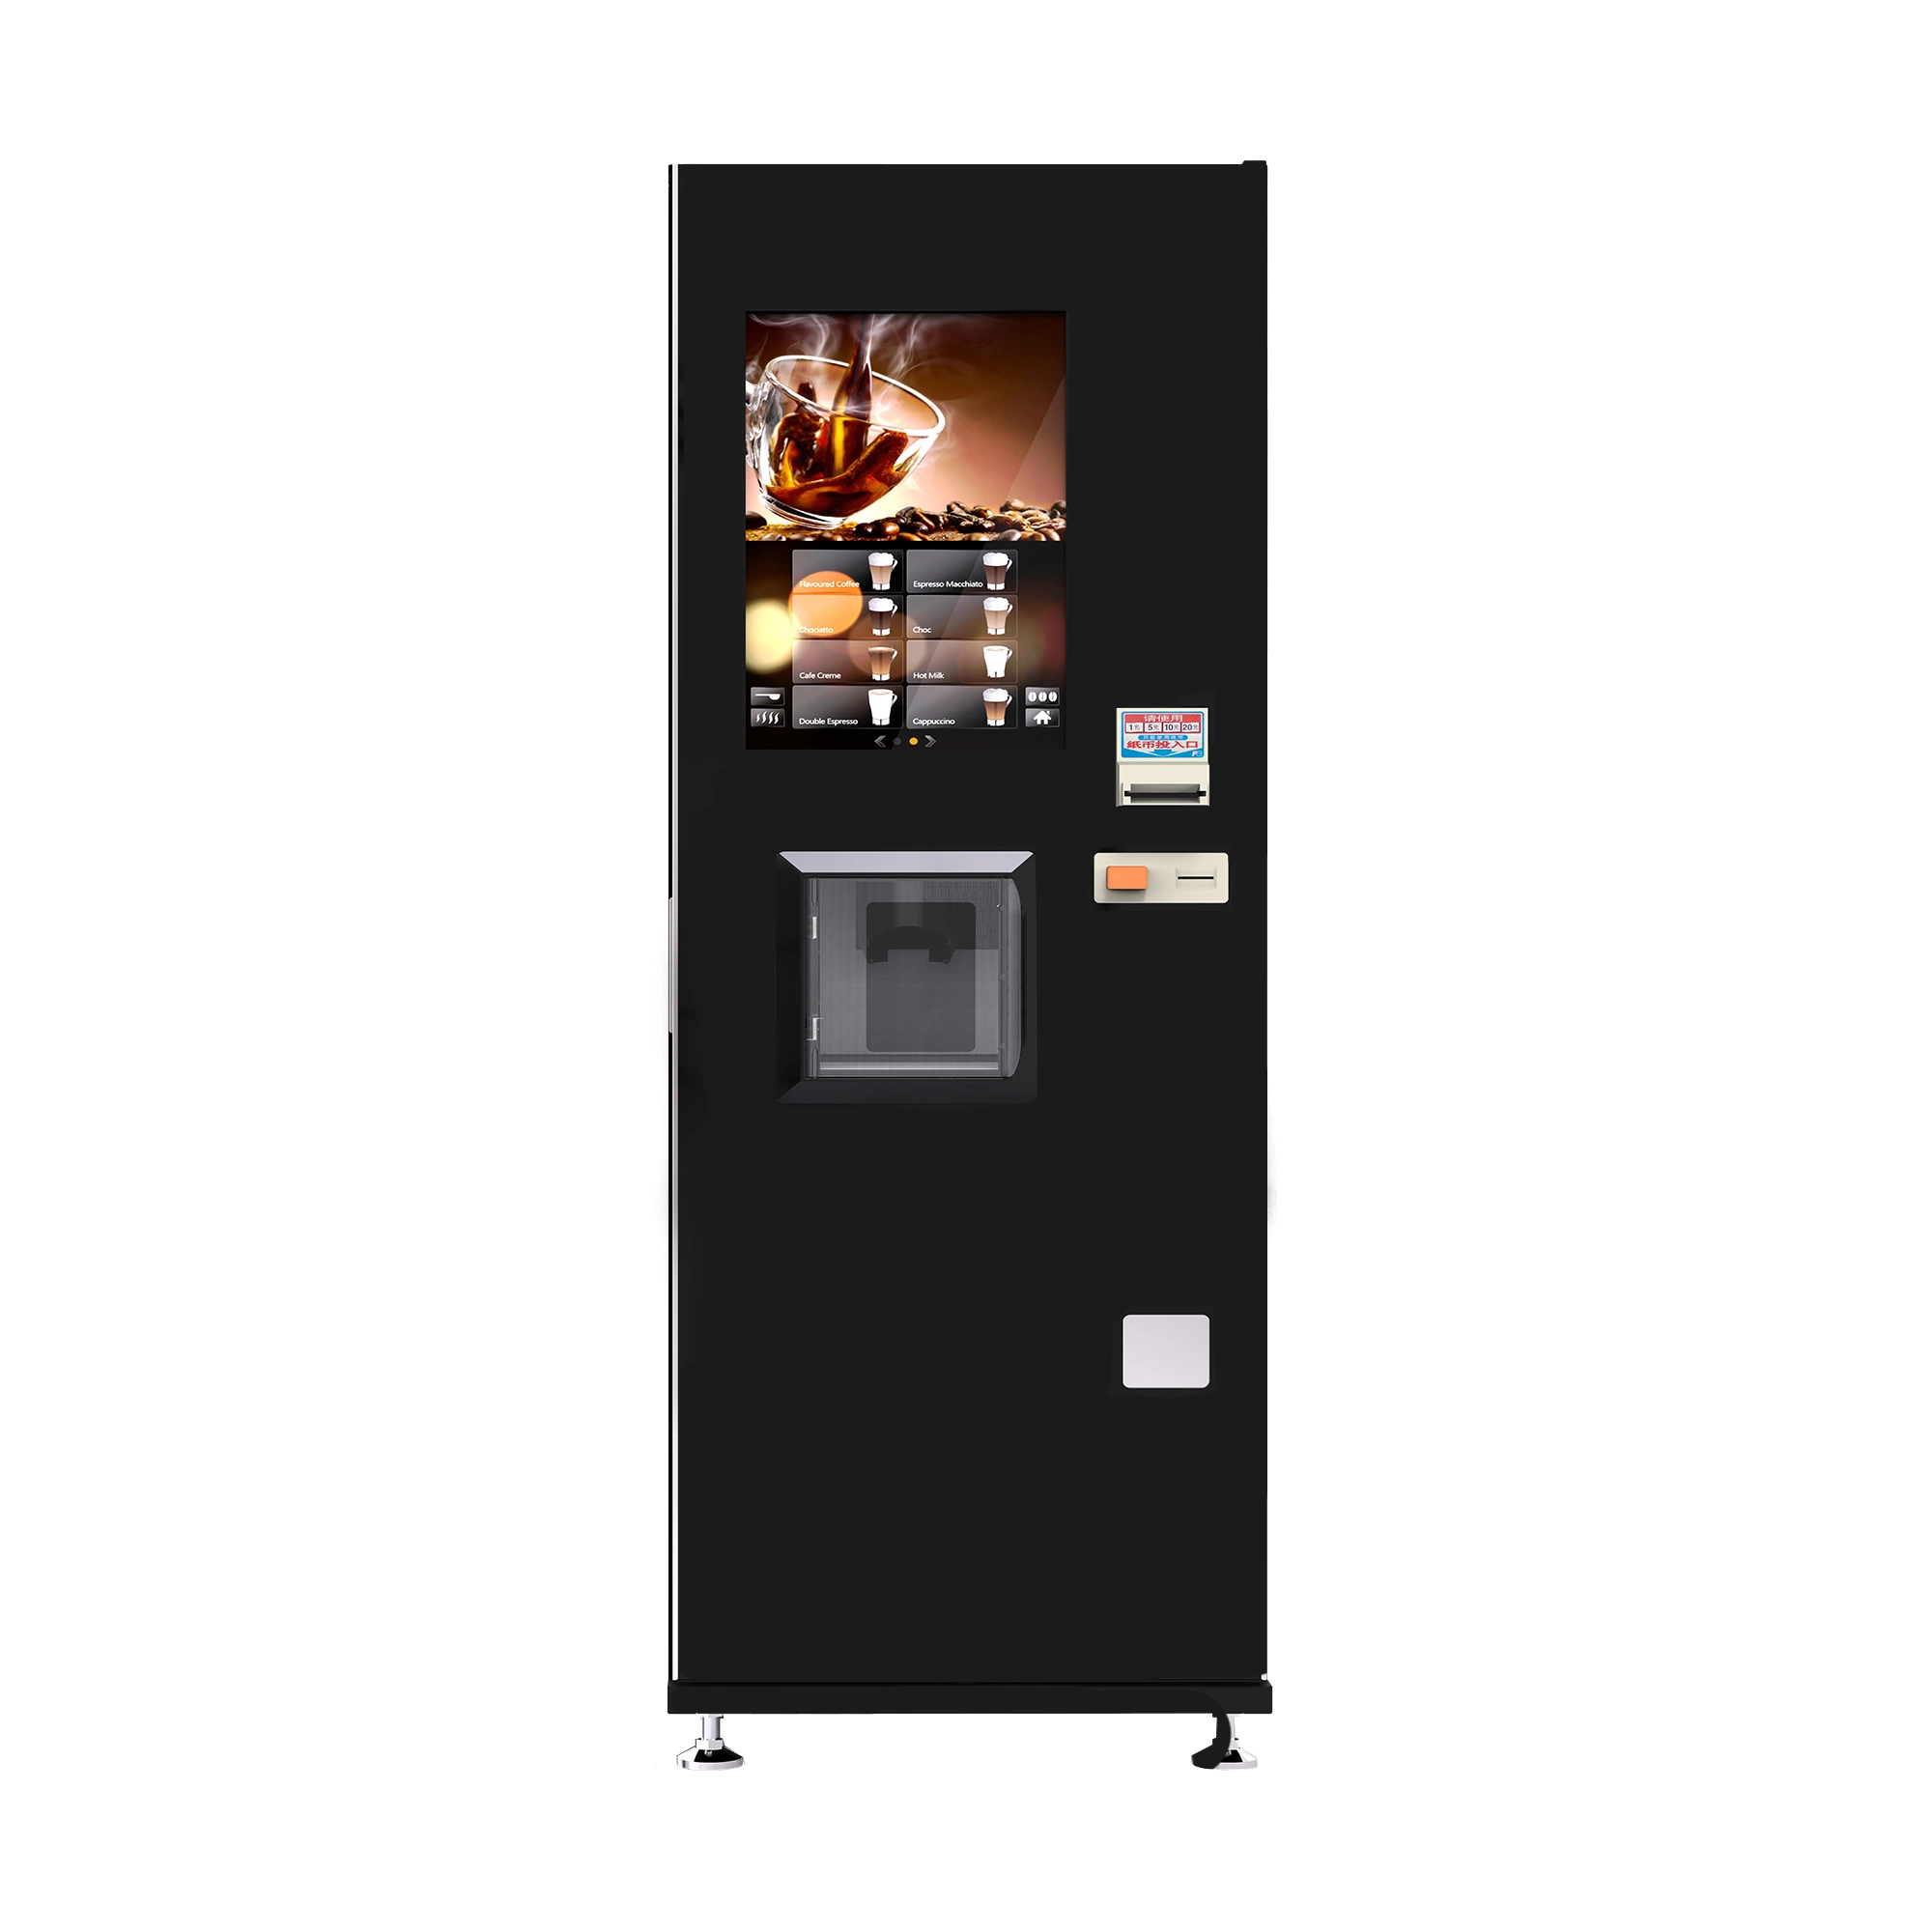 Cash Operated Espresso Coffee Vending Machine with Touch Screen